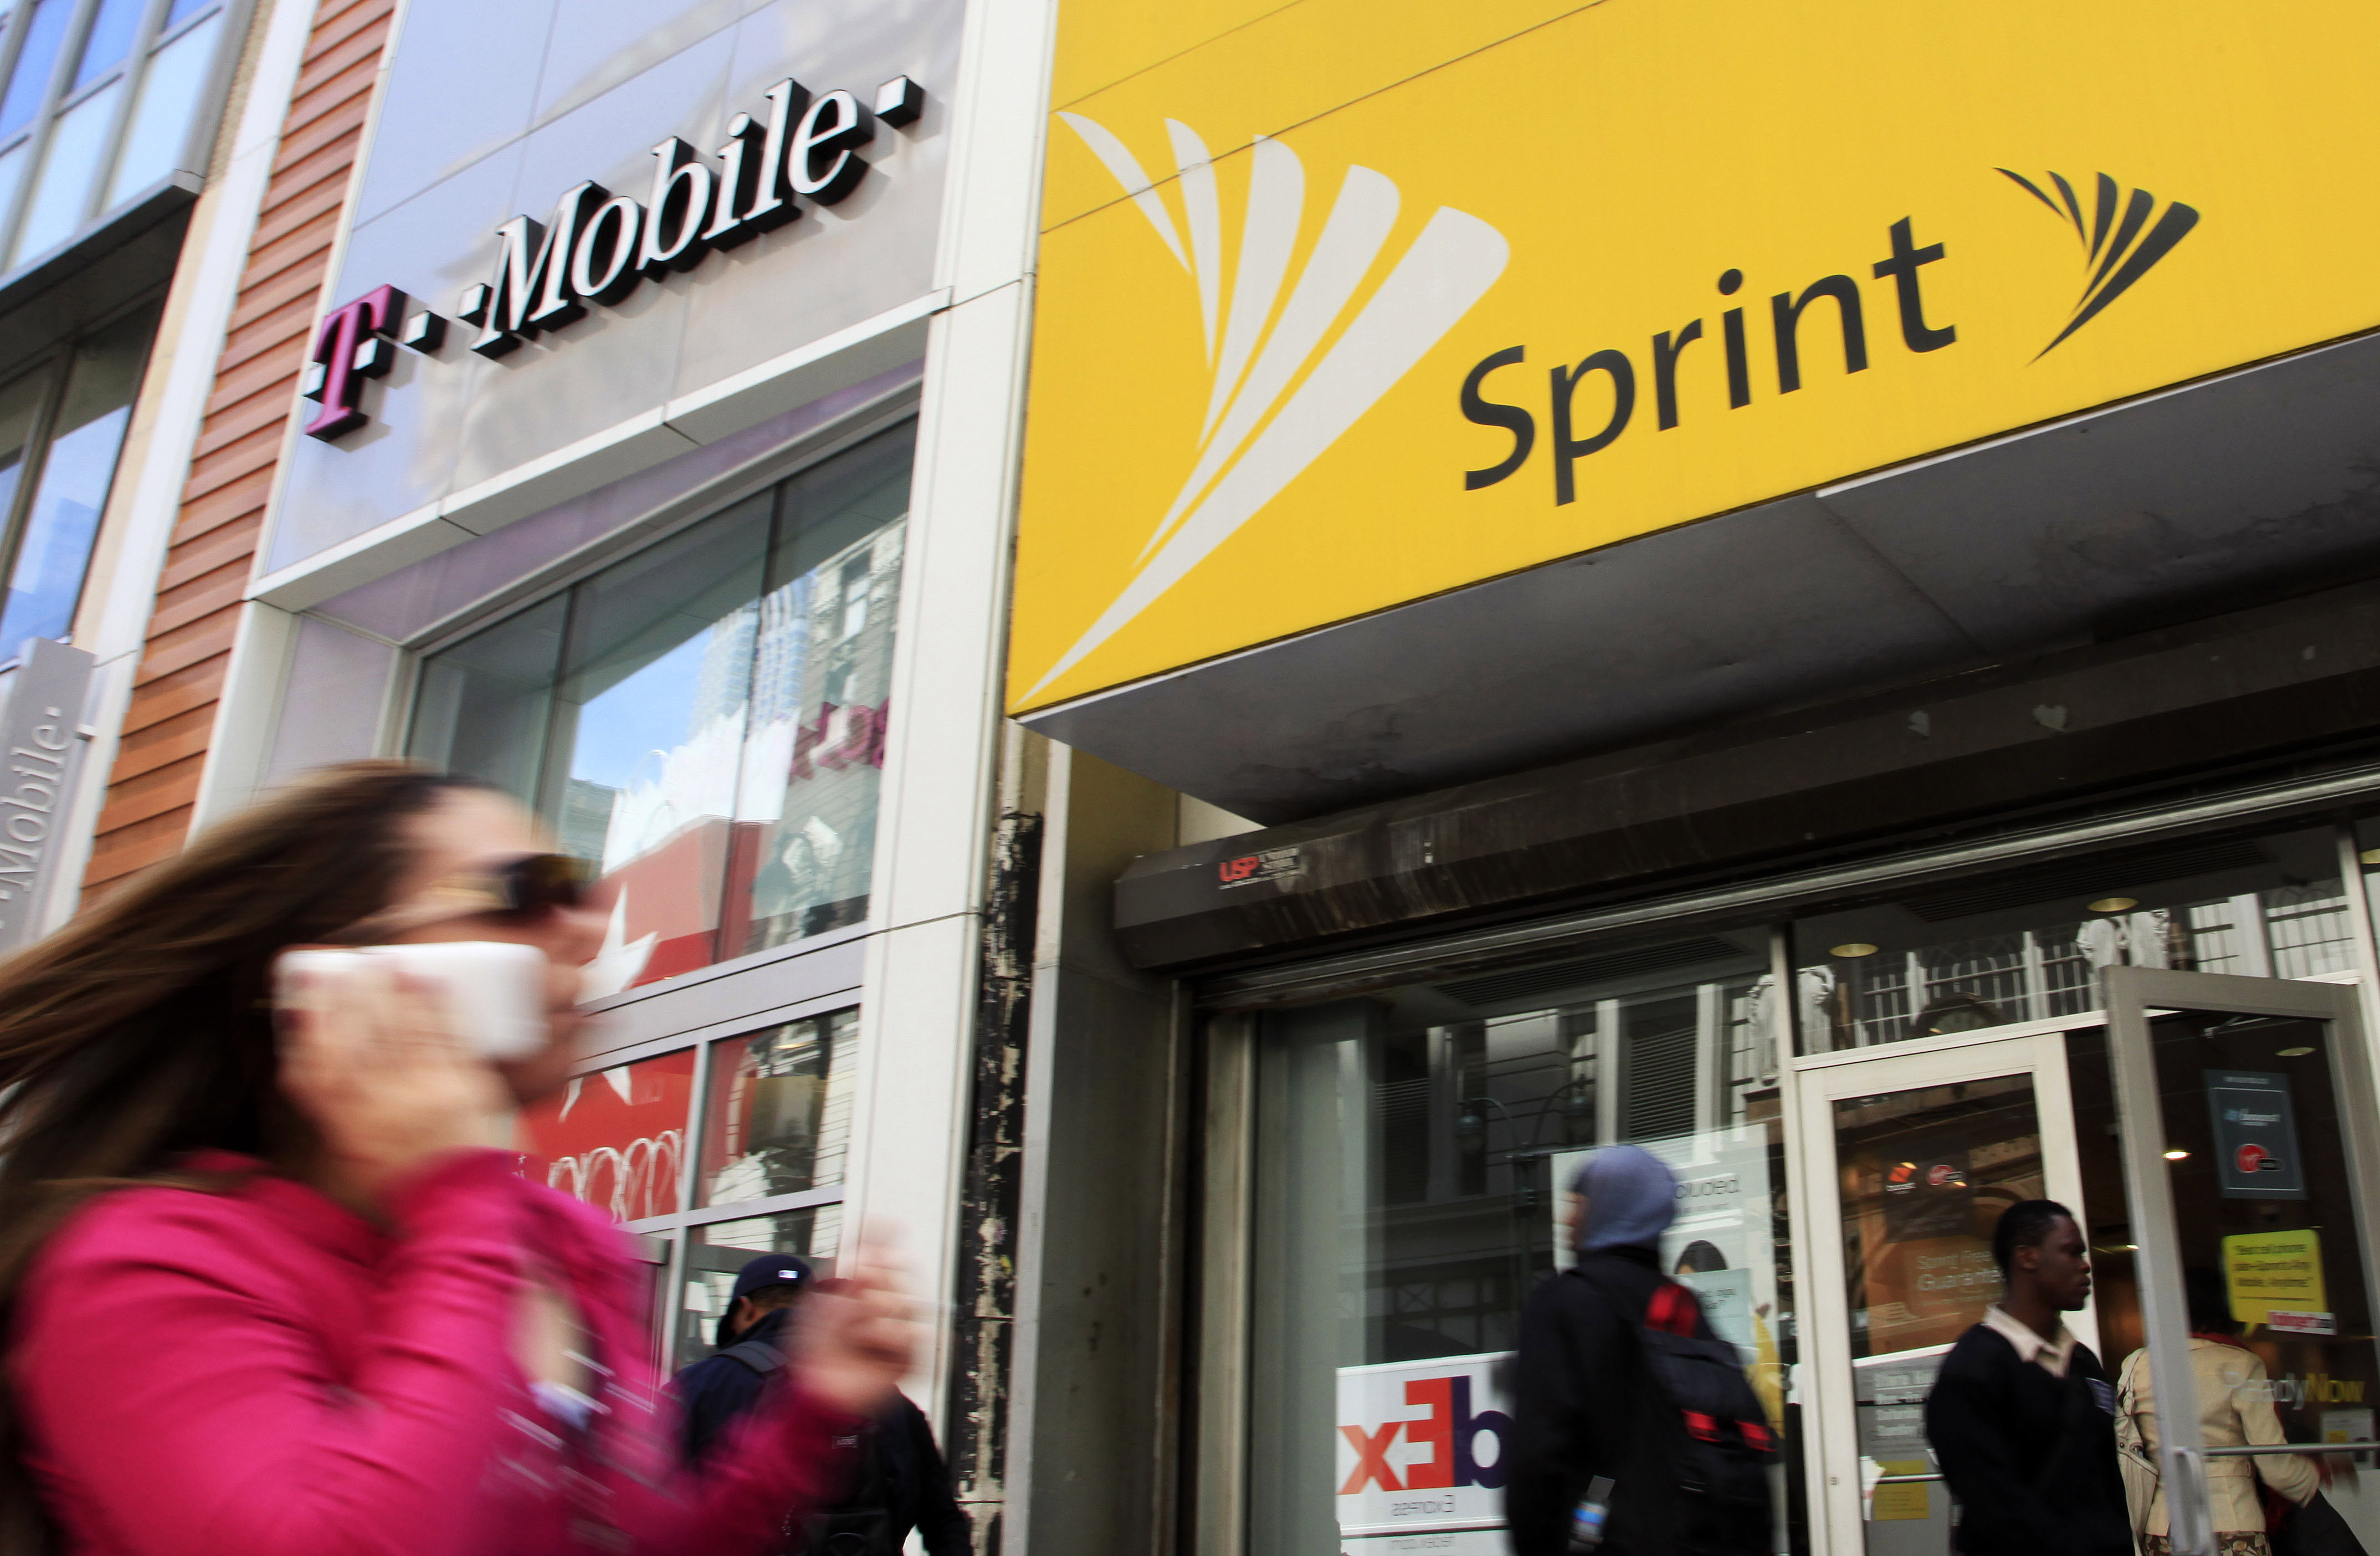 A woman using a cell phone walks past T-Mobile and Sprint stores, Tuesday, April 27, 2010, in New York. Sprint Nextel Corp. on Wednesday, April 28, said it lost a net 75,000 subscribers in the first three months of 2010, compared to a loss of 182,000 in the same quarter last year.(AP Photo/Mark Lennihan)